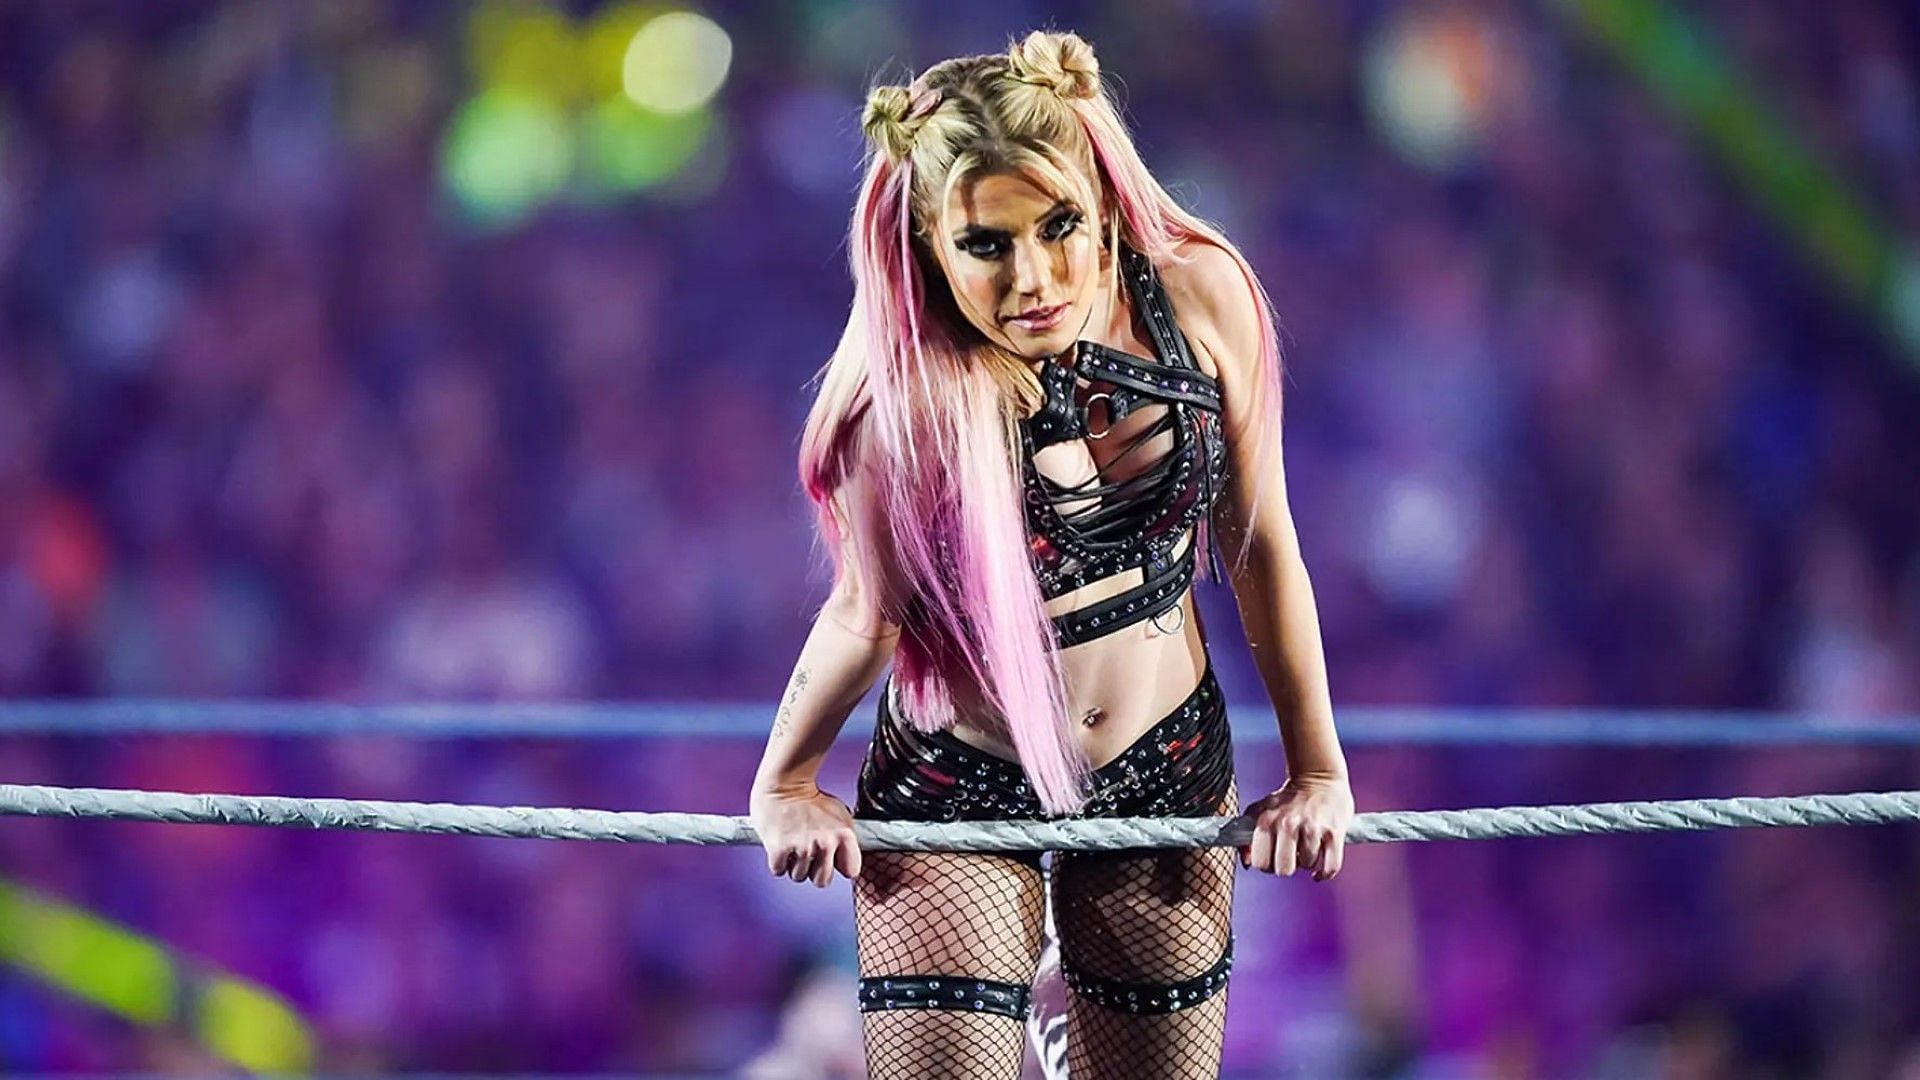 Alexa Bliss poses on the ropes for the WWE crowd